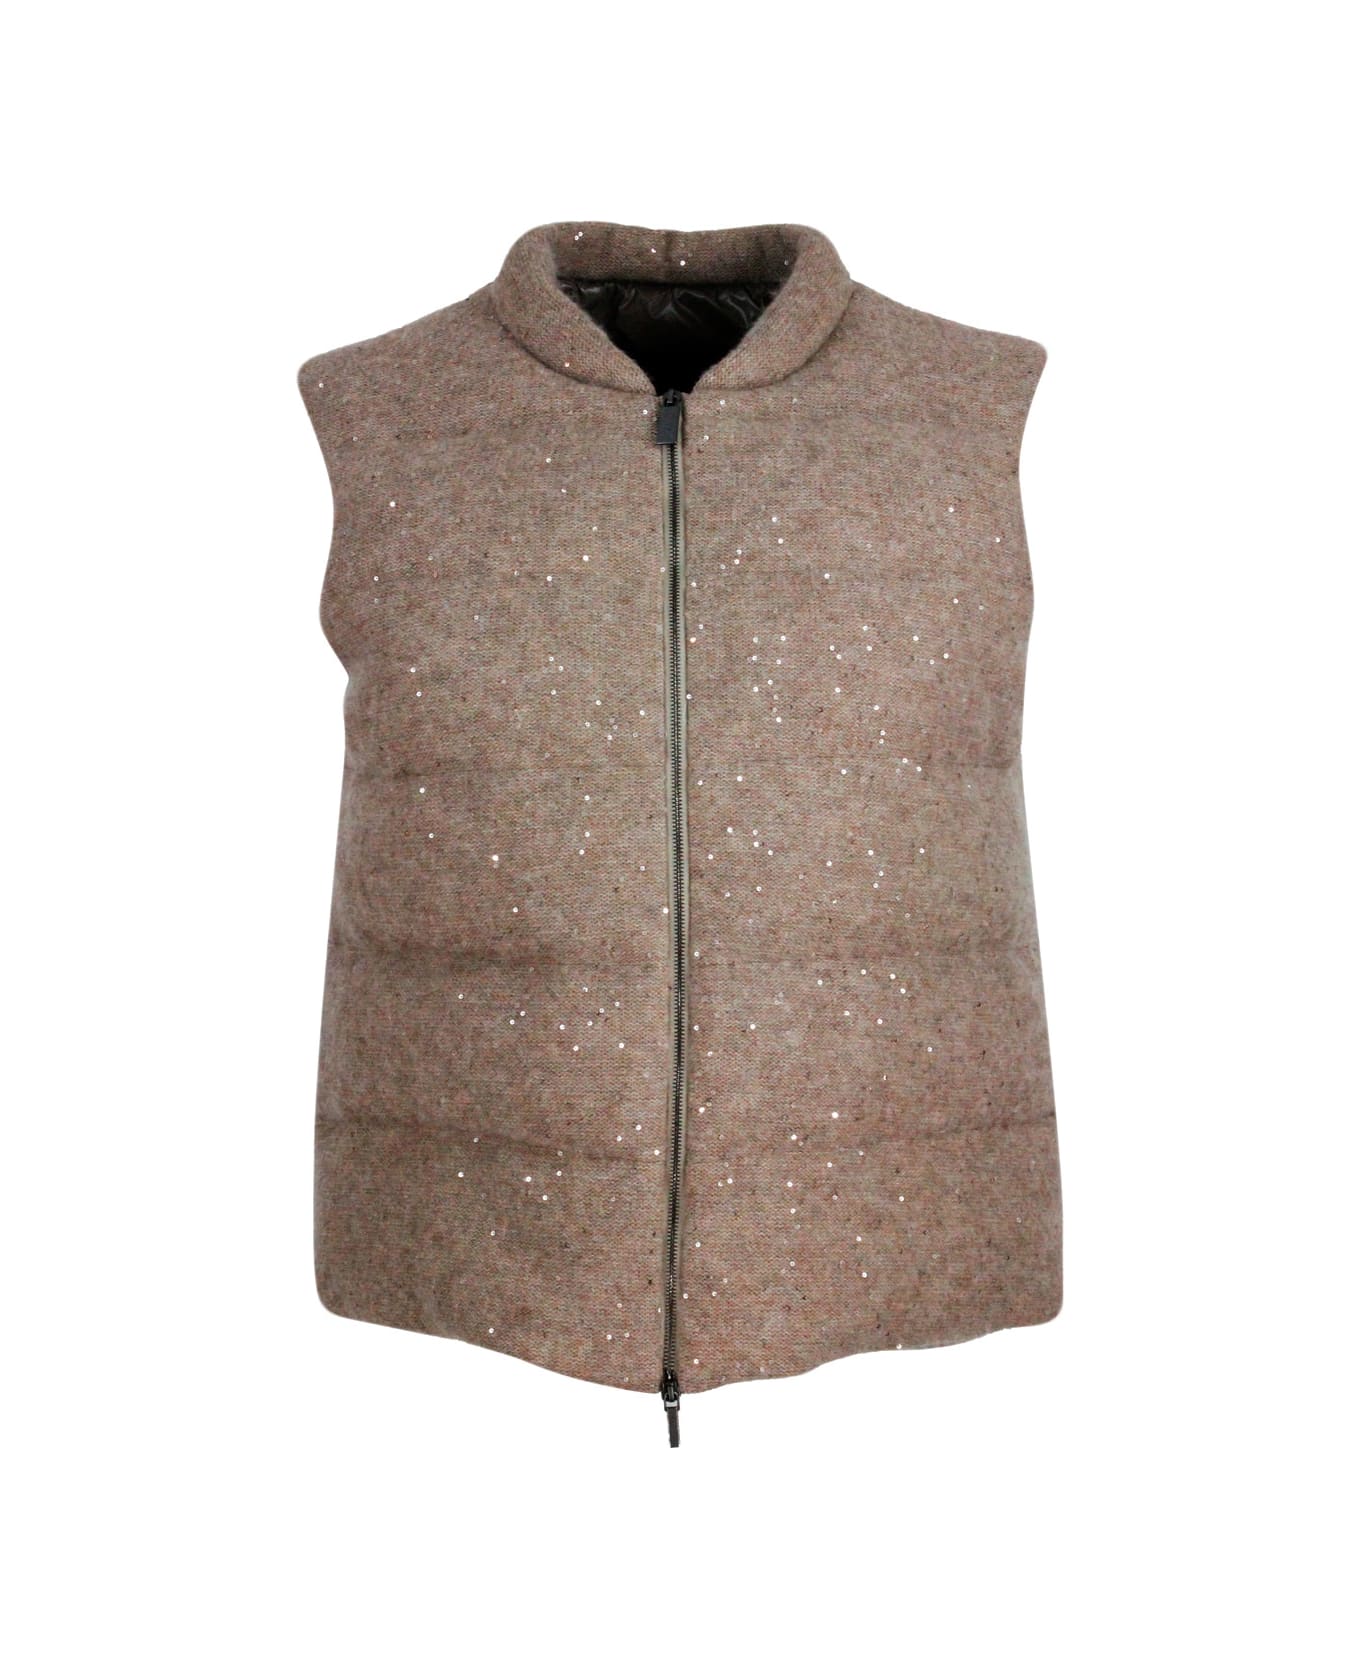 Fabiana Filippi Sleeveless Vest Padded With Real Goose Down In Wool, Silk And Cashmere Embellished With Micro Sequins - Nut